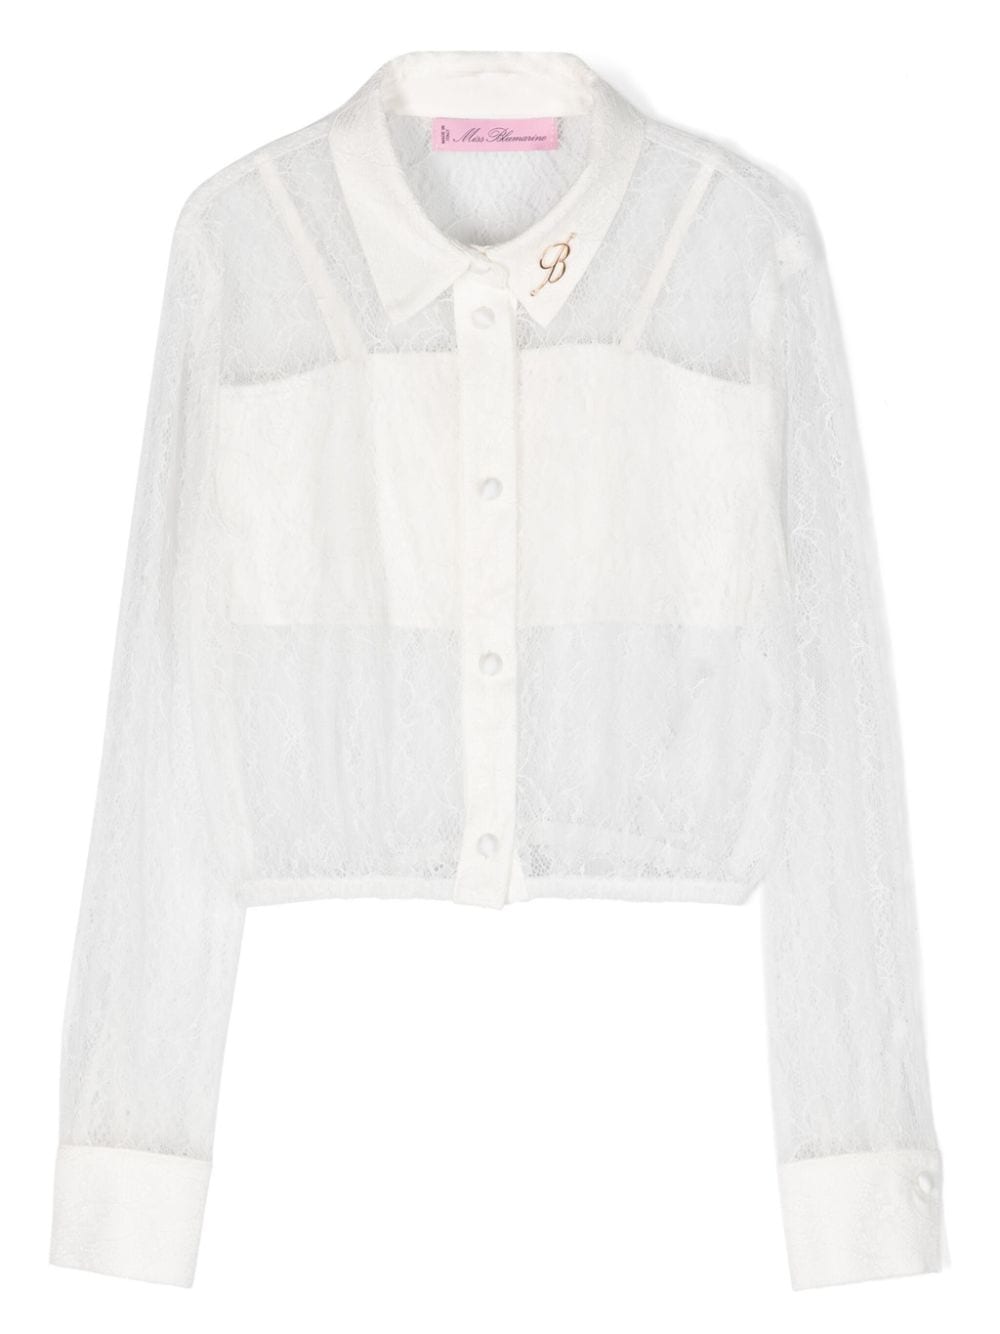 White lace shirt for girls